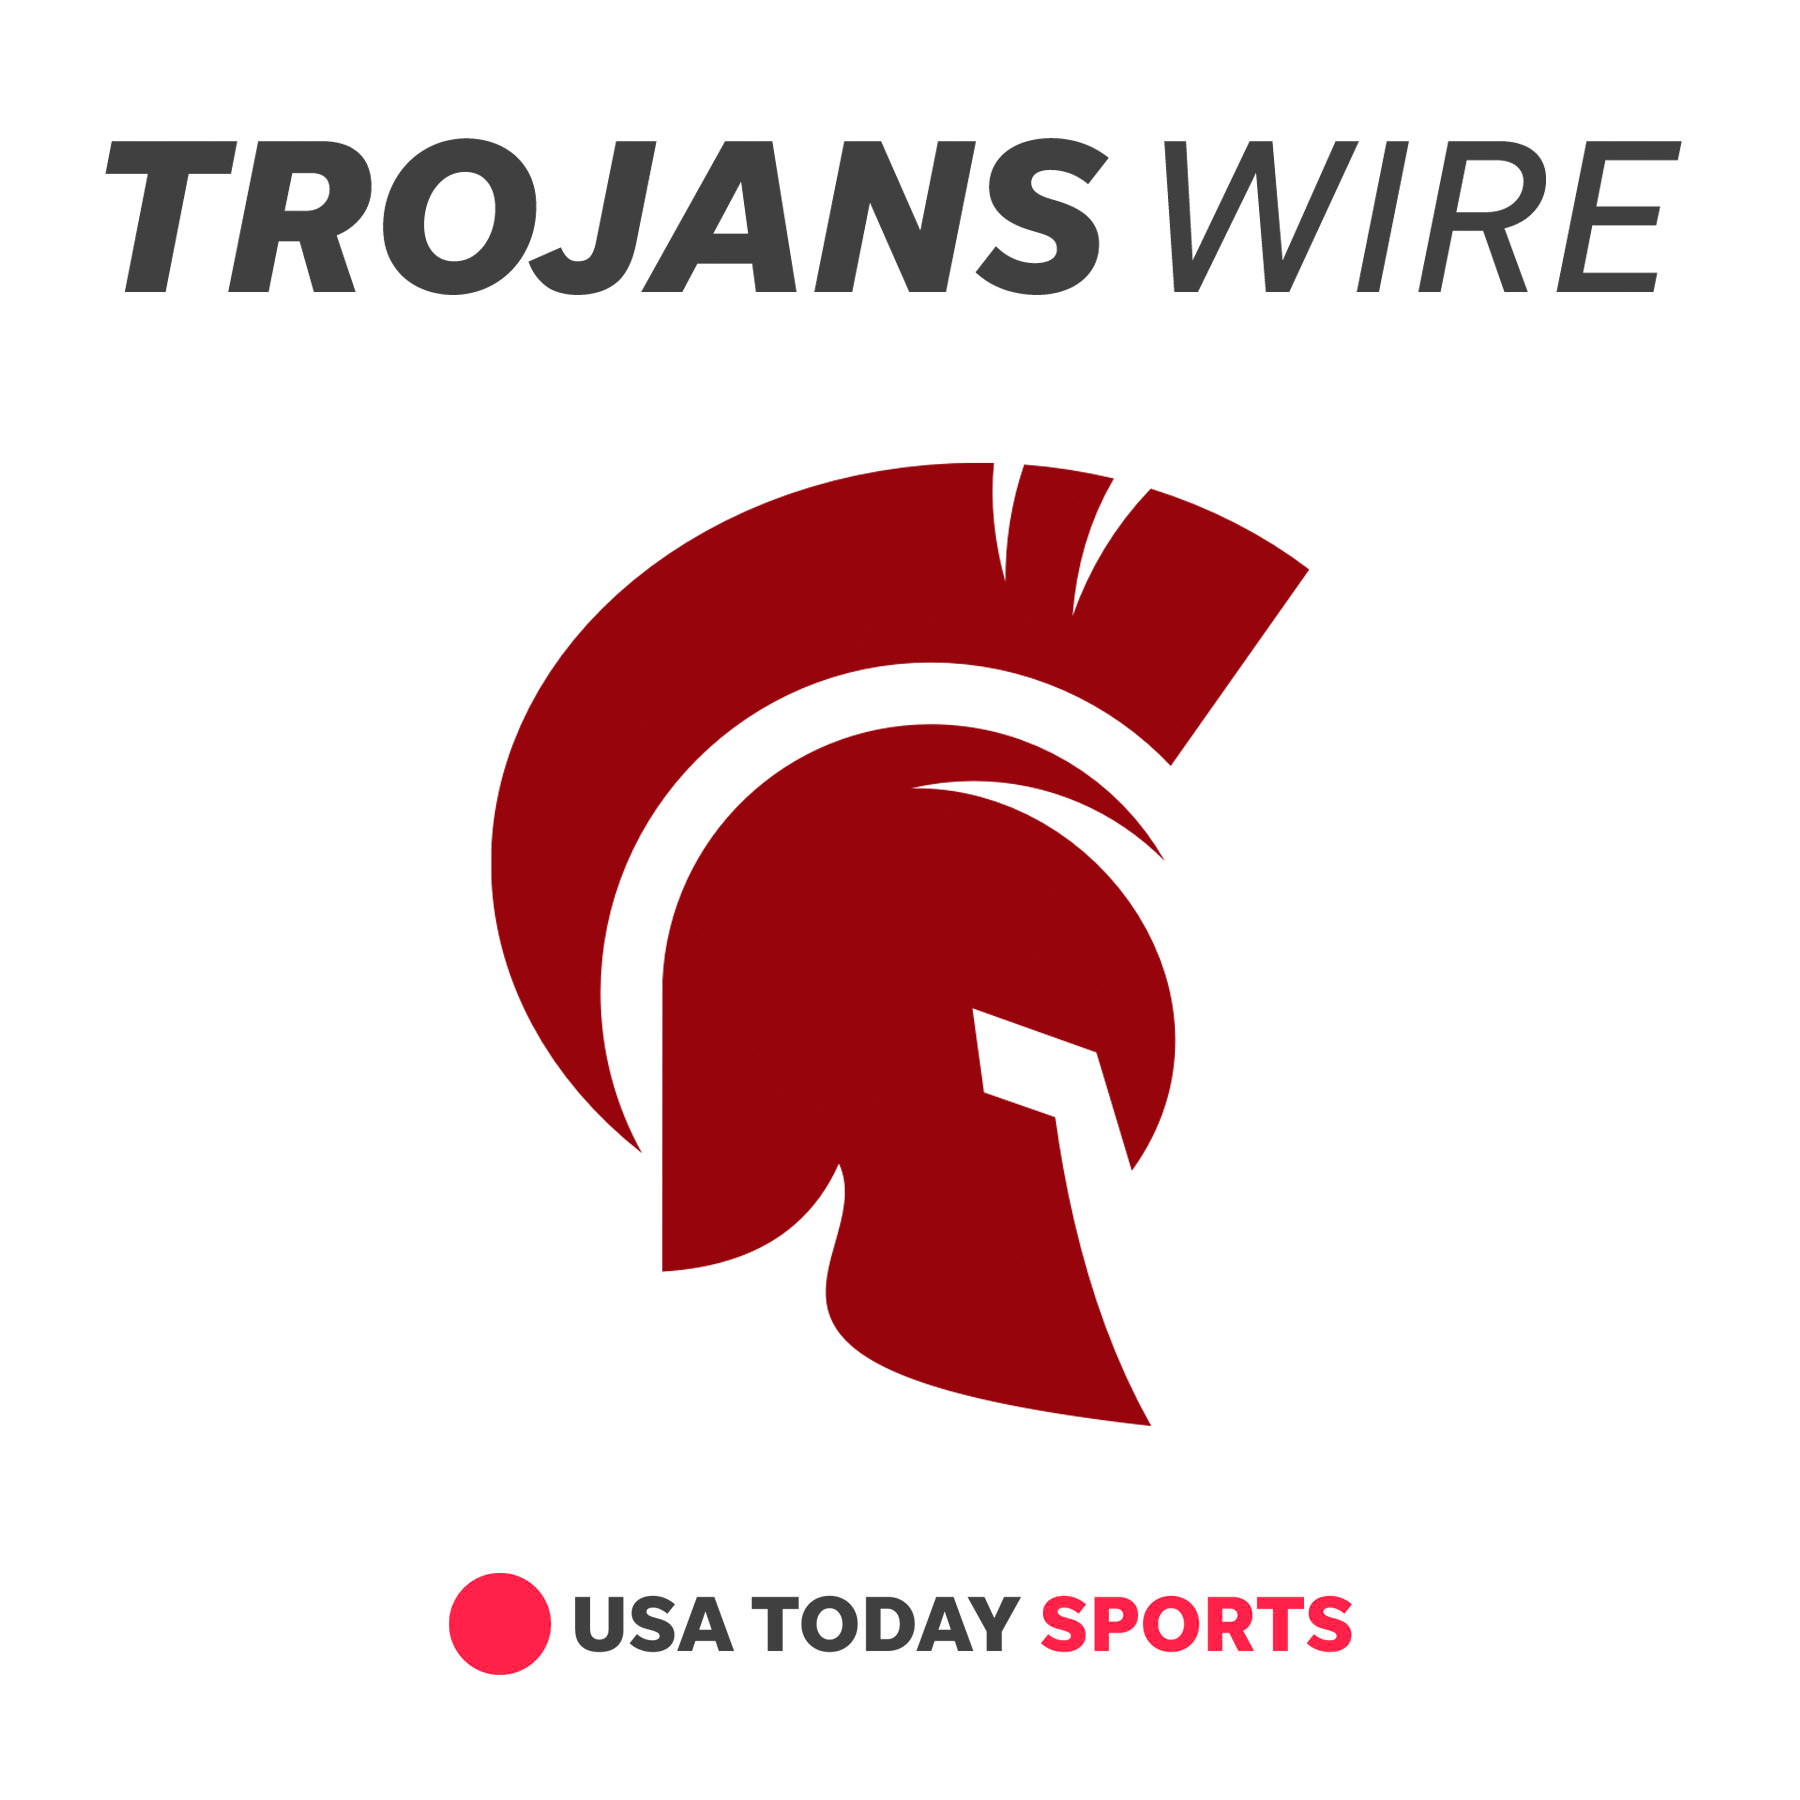 Trojans Wired Women's Basketball Report: February 16